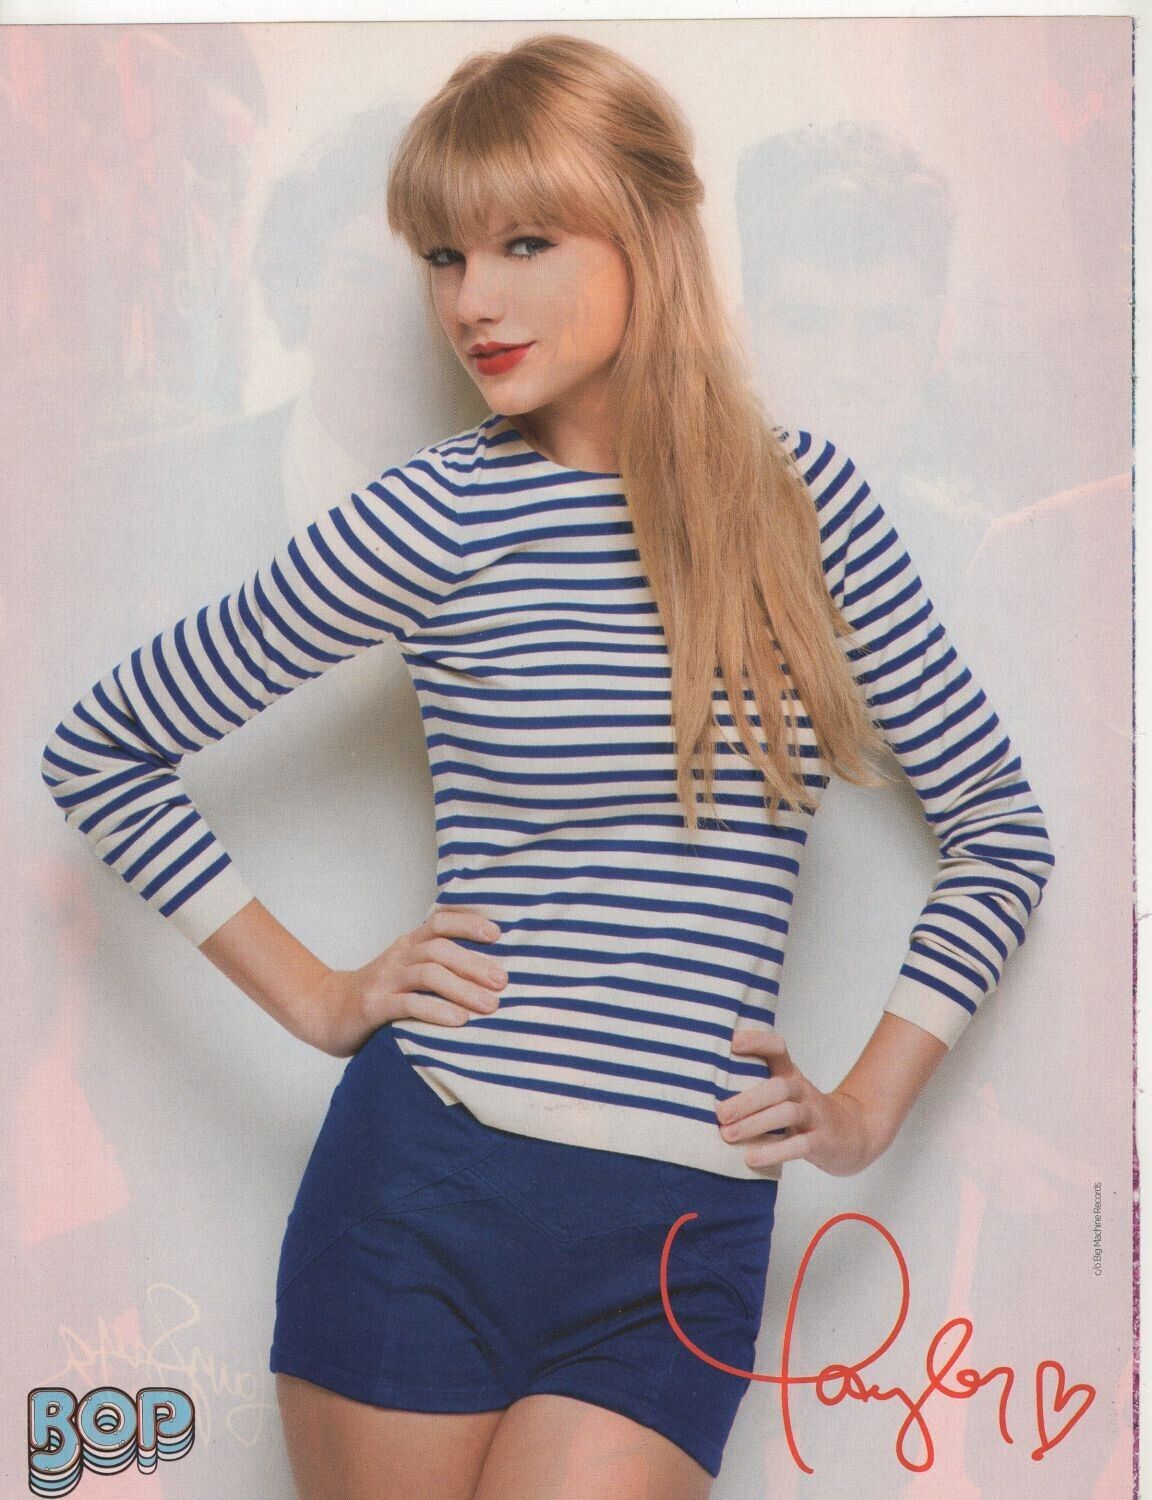 Taylor Swift stripes pinup Harry Styles picture One Direction 1D photo clippings